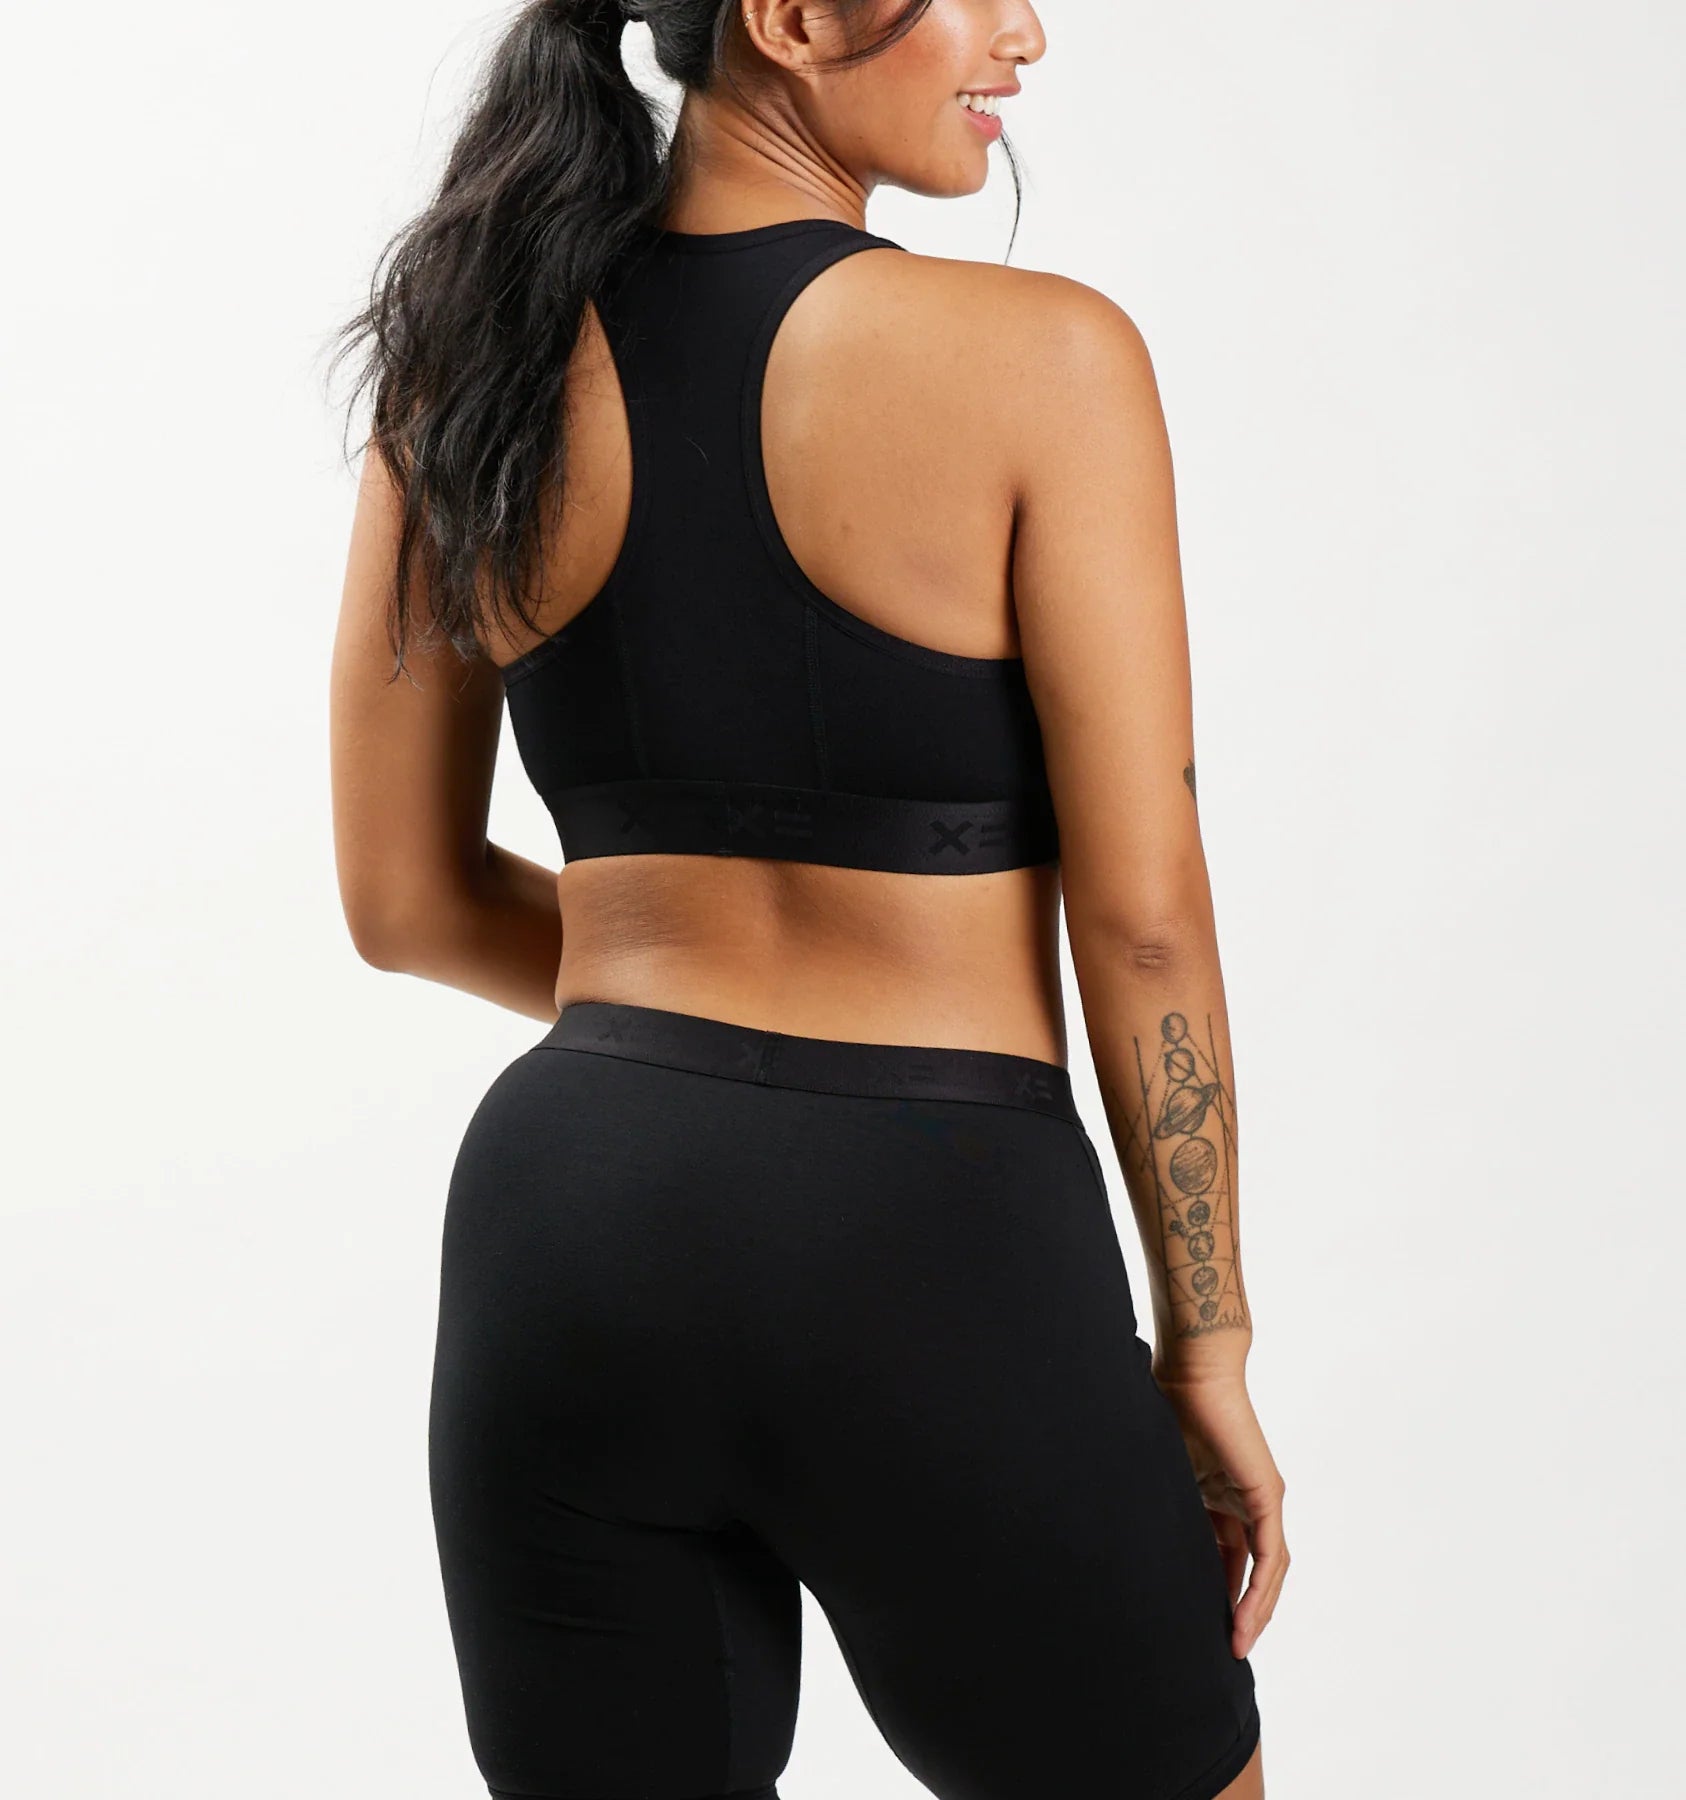 Would you wear this look? 😍 Hilde is wearing the Sphynx Ribbed Sports Bra  paired with the Material Girl Legging in Onyx Black. The Sp